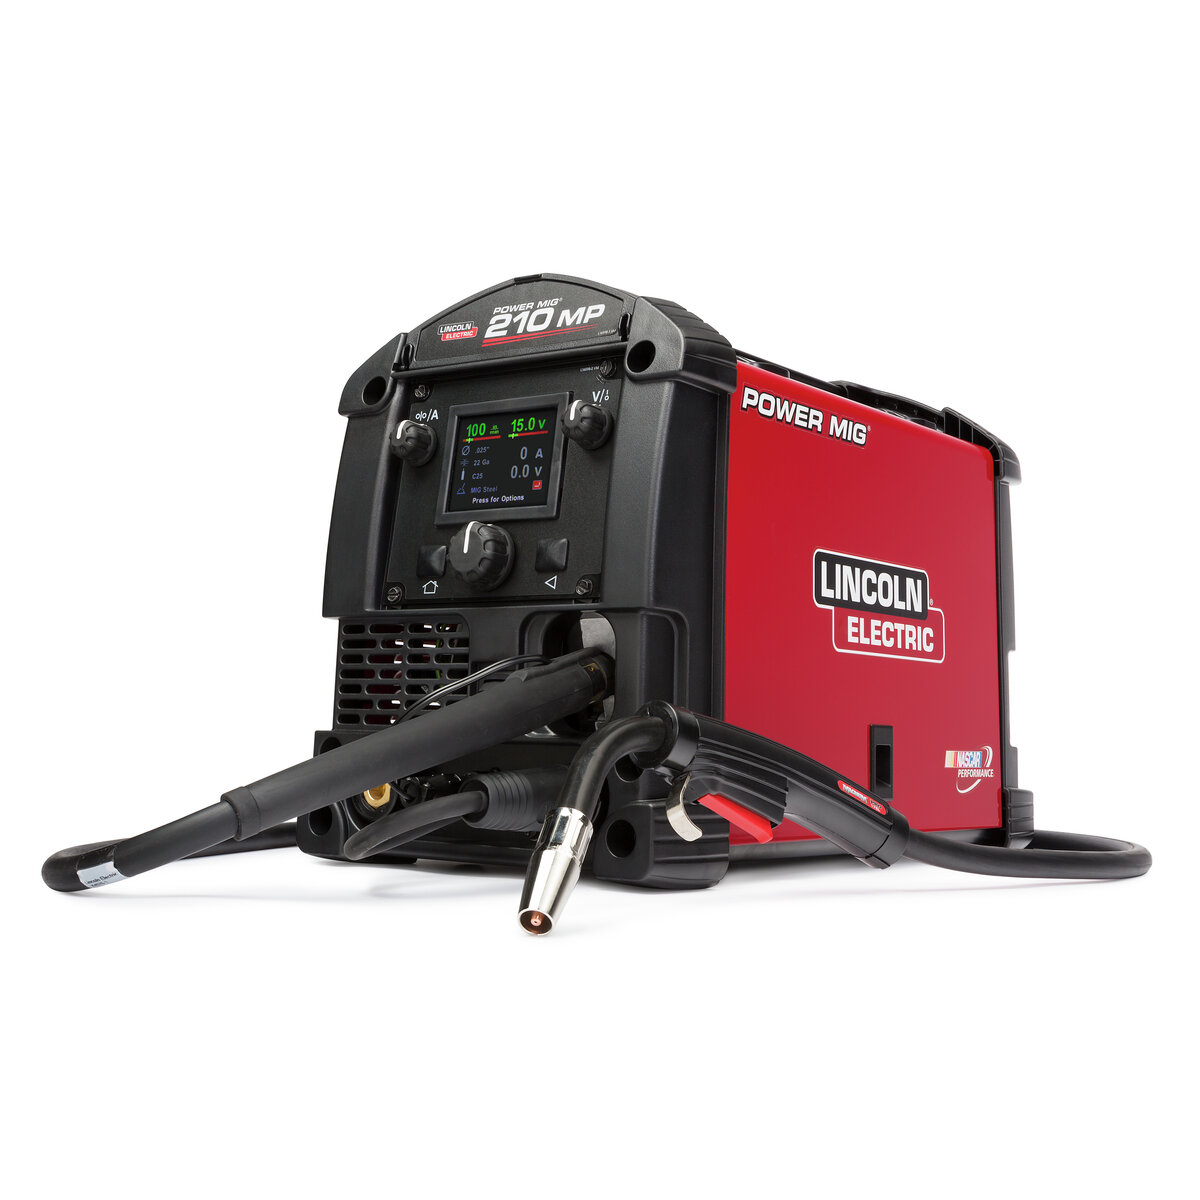 Power MIG® 210 MP® multi-process welder is portable for MIG, stick, TIG, and flux-cored welding.